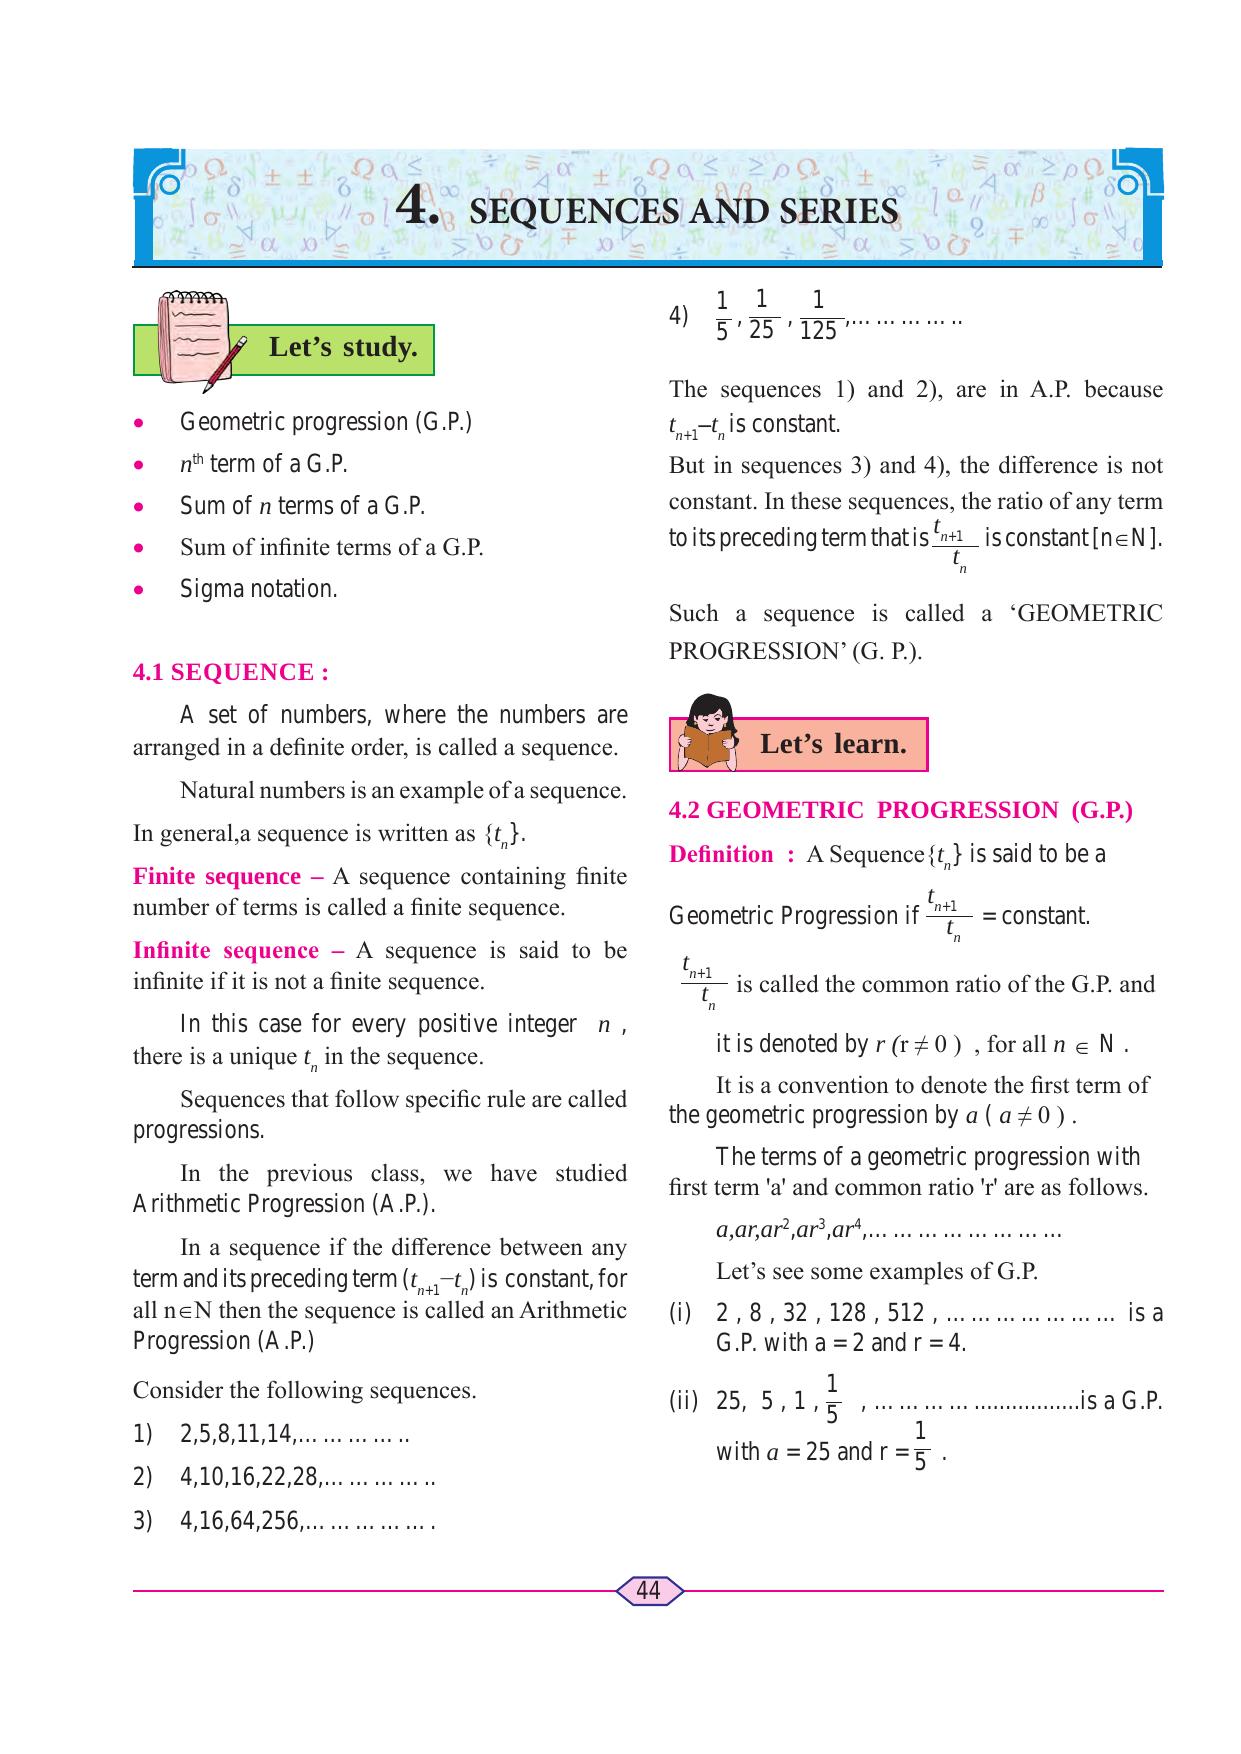 Maharashtra Board Class 11 Maths (Commerce) (Part 1) Textbook - Page 54